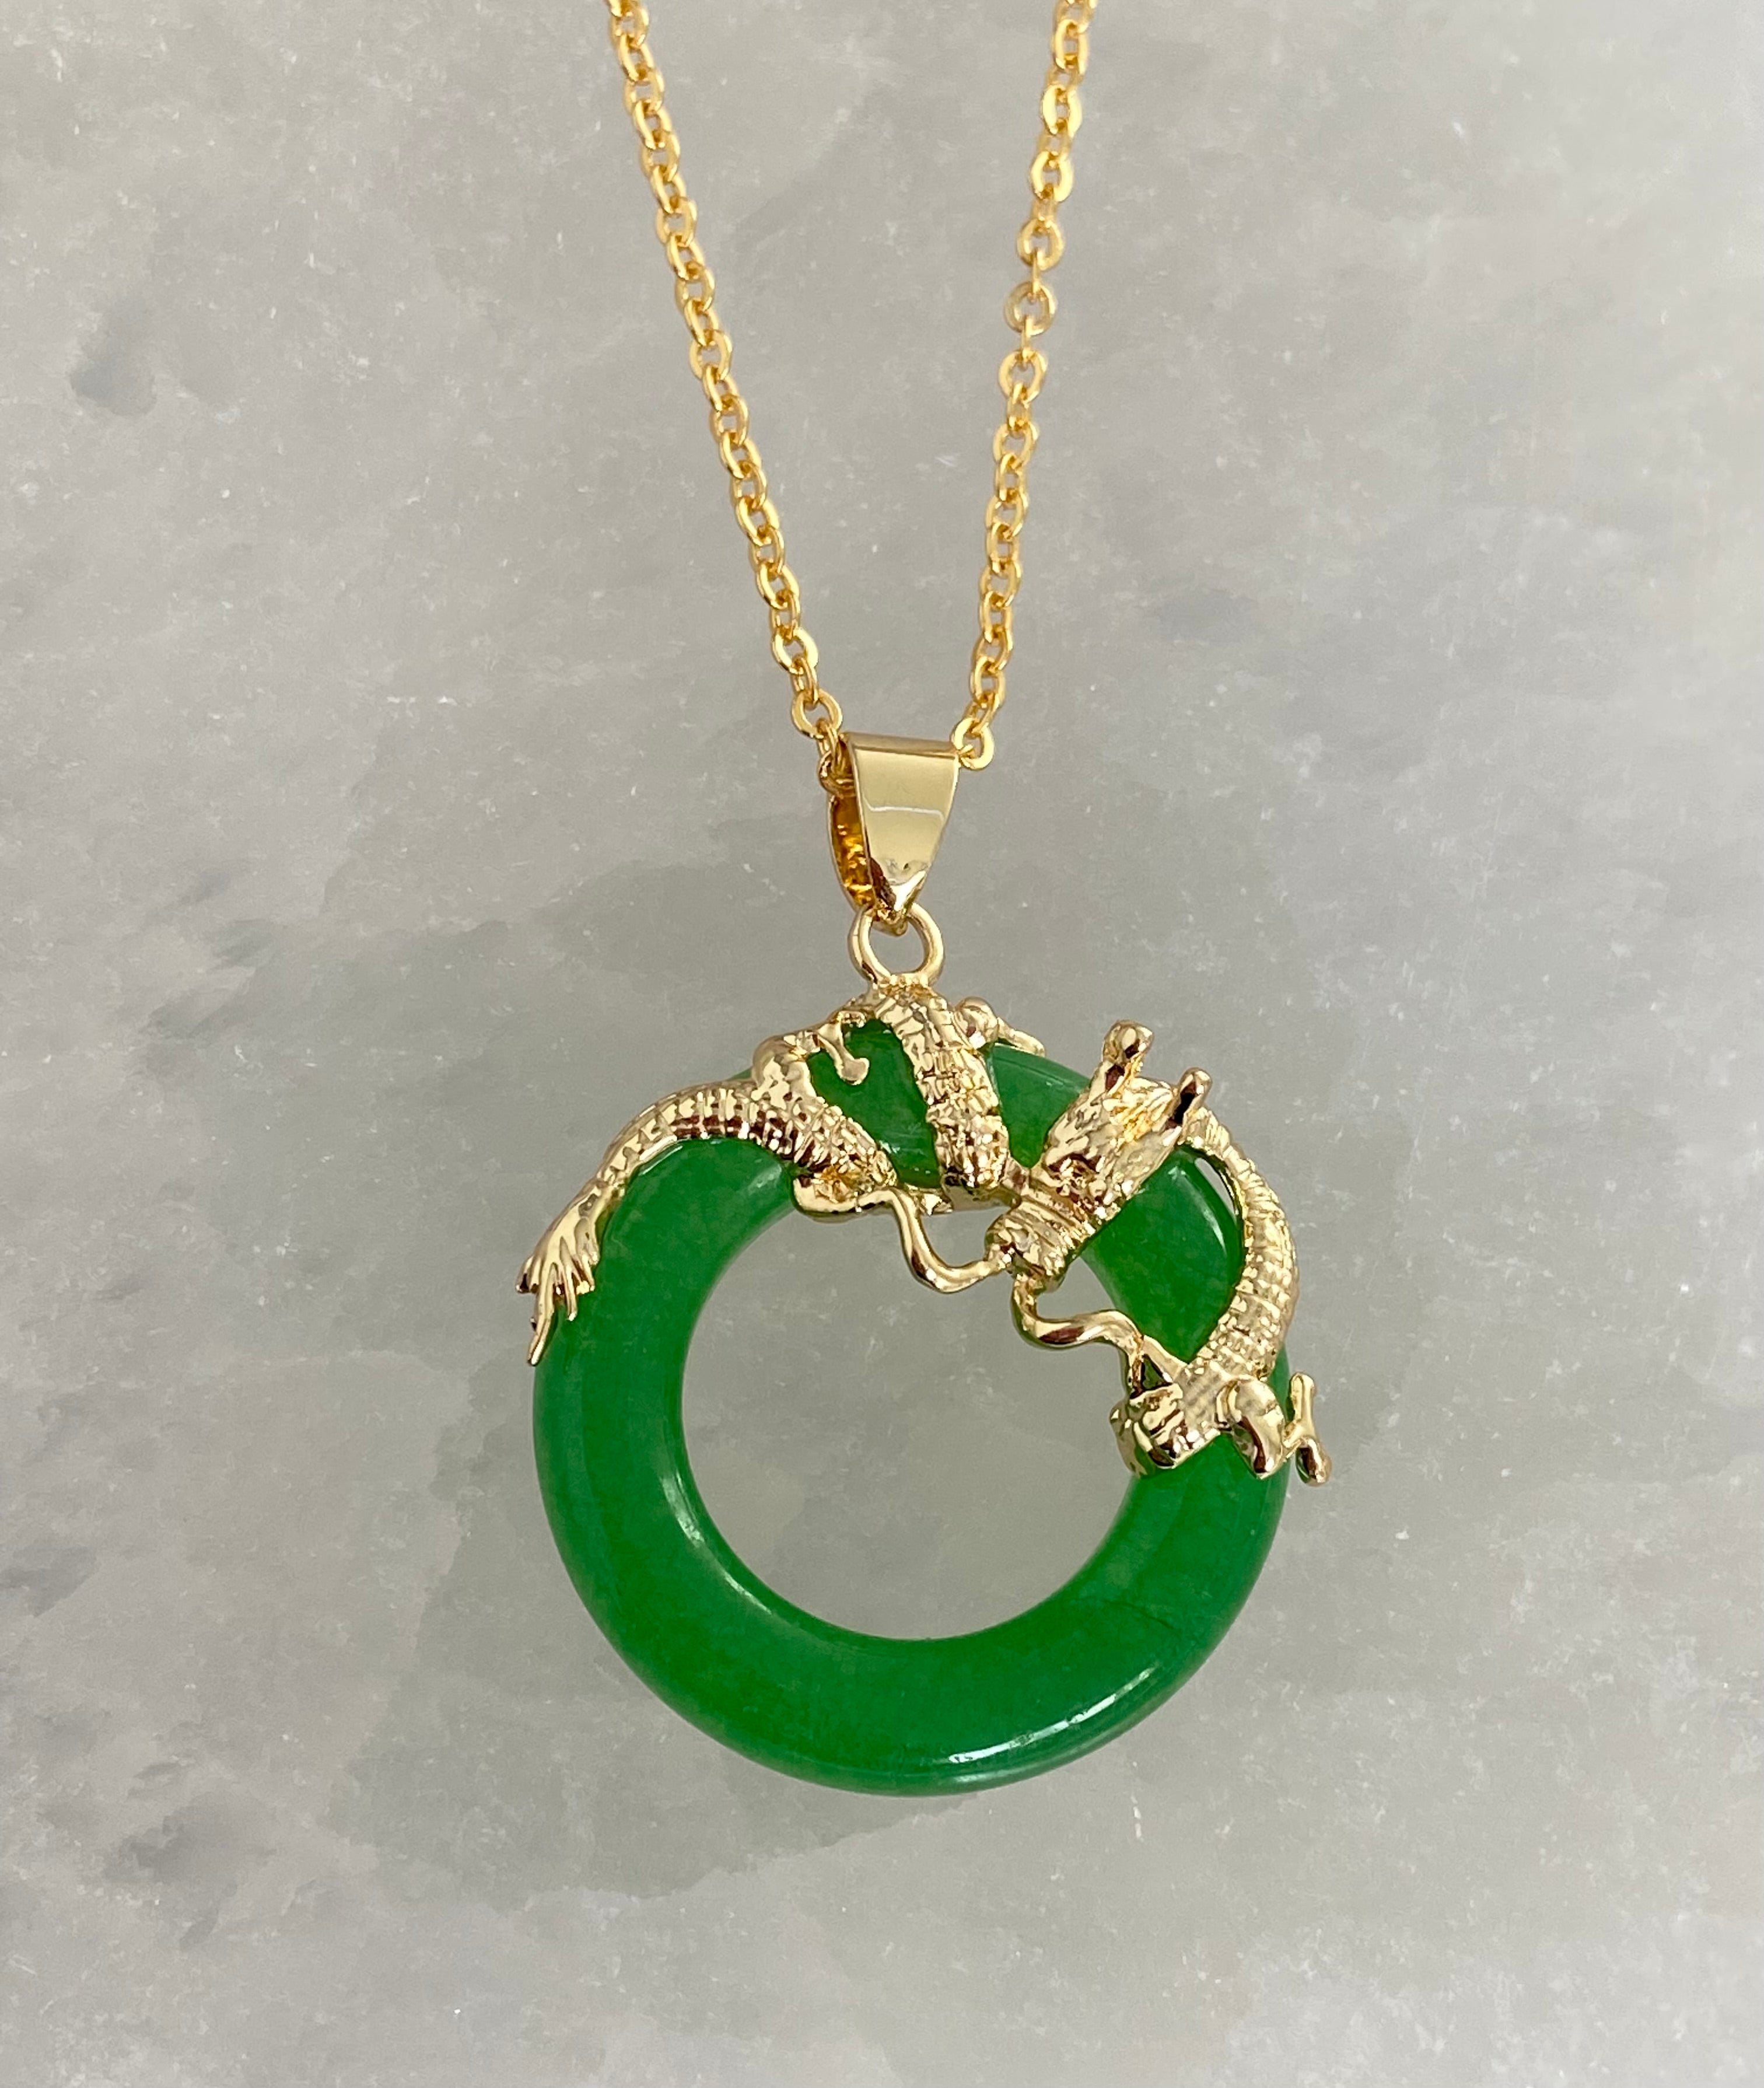 jade dragon necklace products for sale | eBay